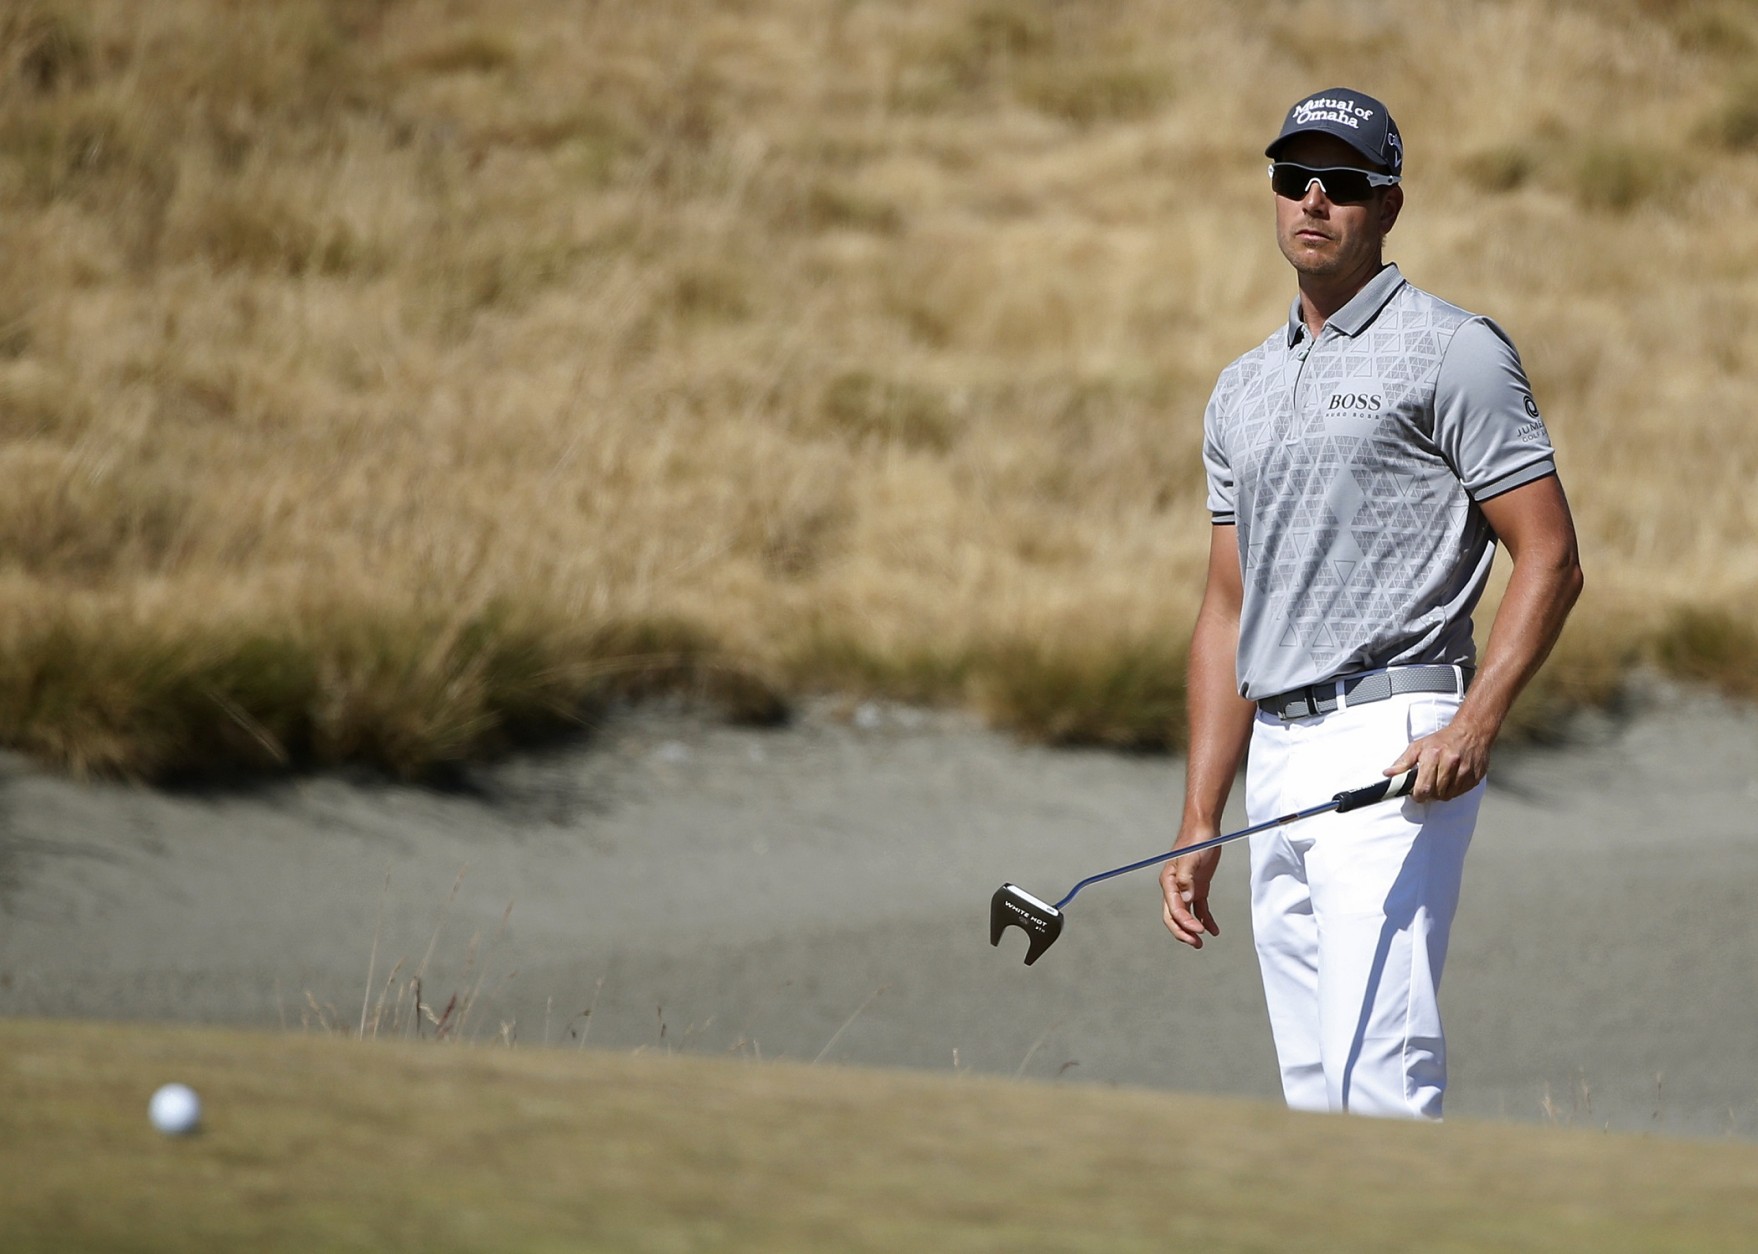 Henrik Stenson, of Sweden, watches his putt on the 15th hole during the second round of the U.S. Open golf tournament at Chambers Bay on Friday, June 19, 2015 in University Place, Wash. (AP Photo/Lenny Ignelzi)